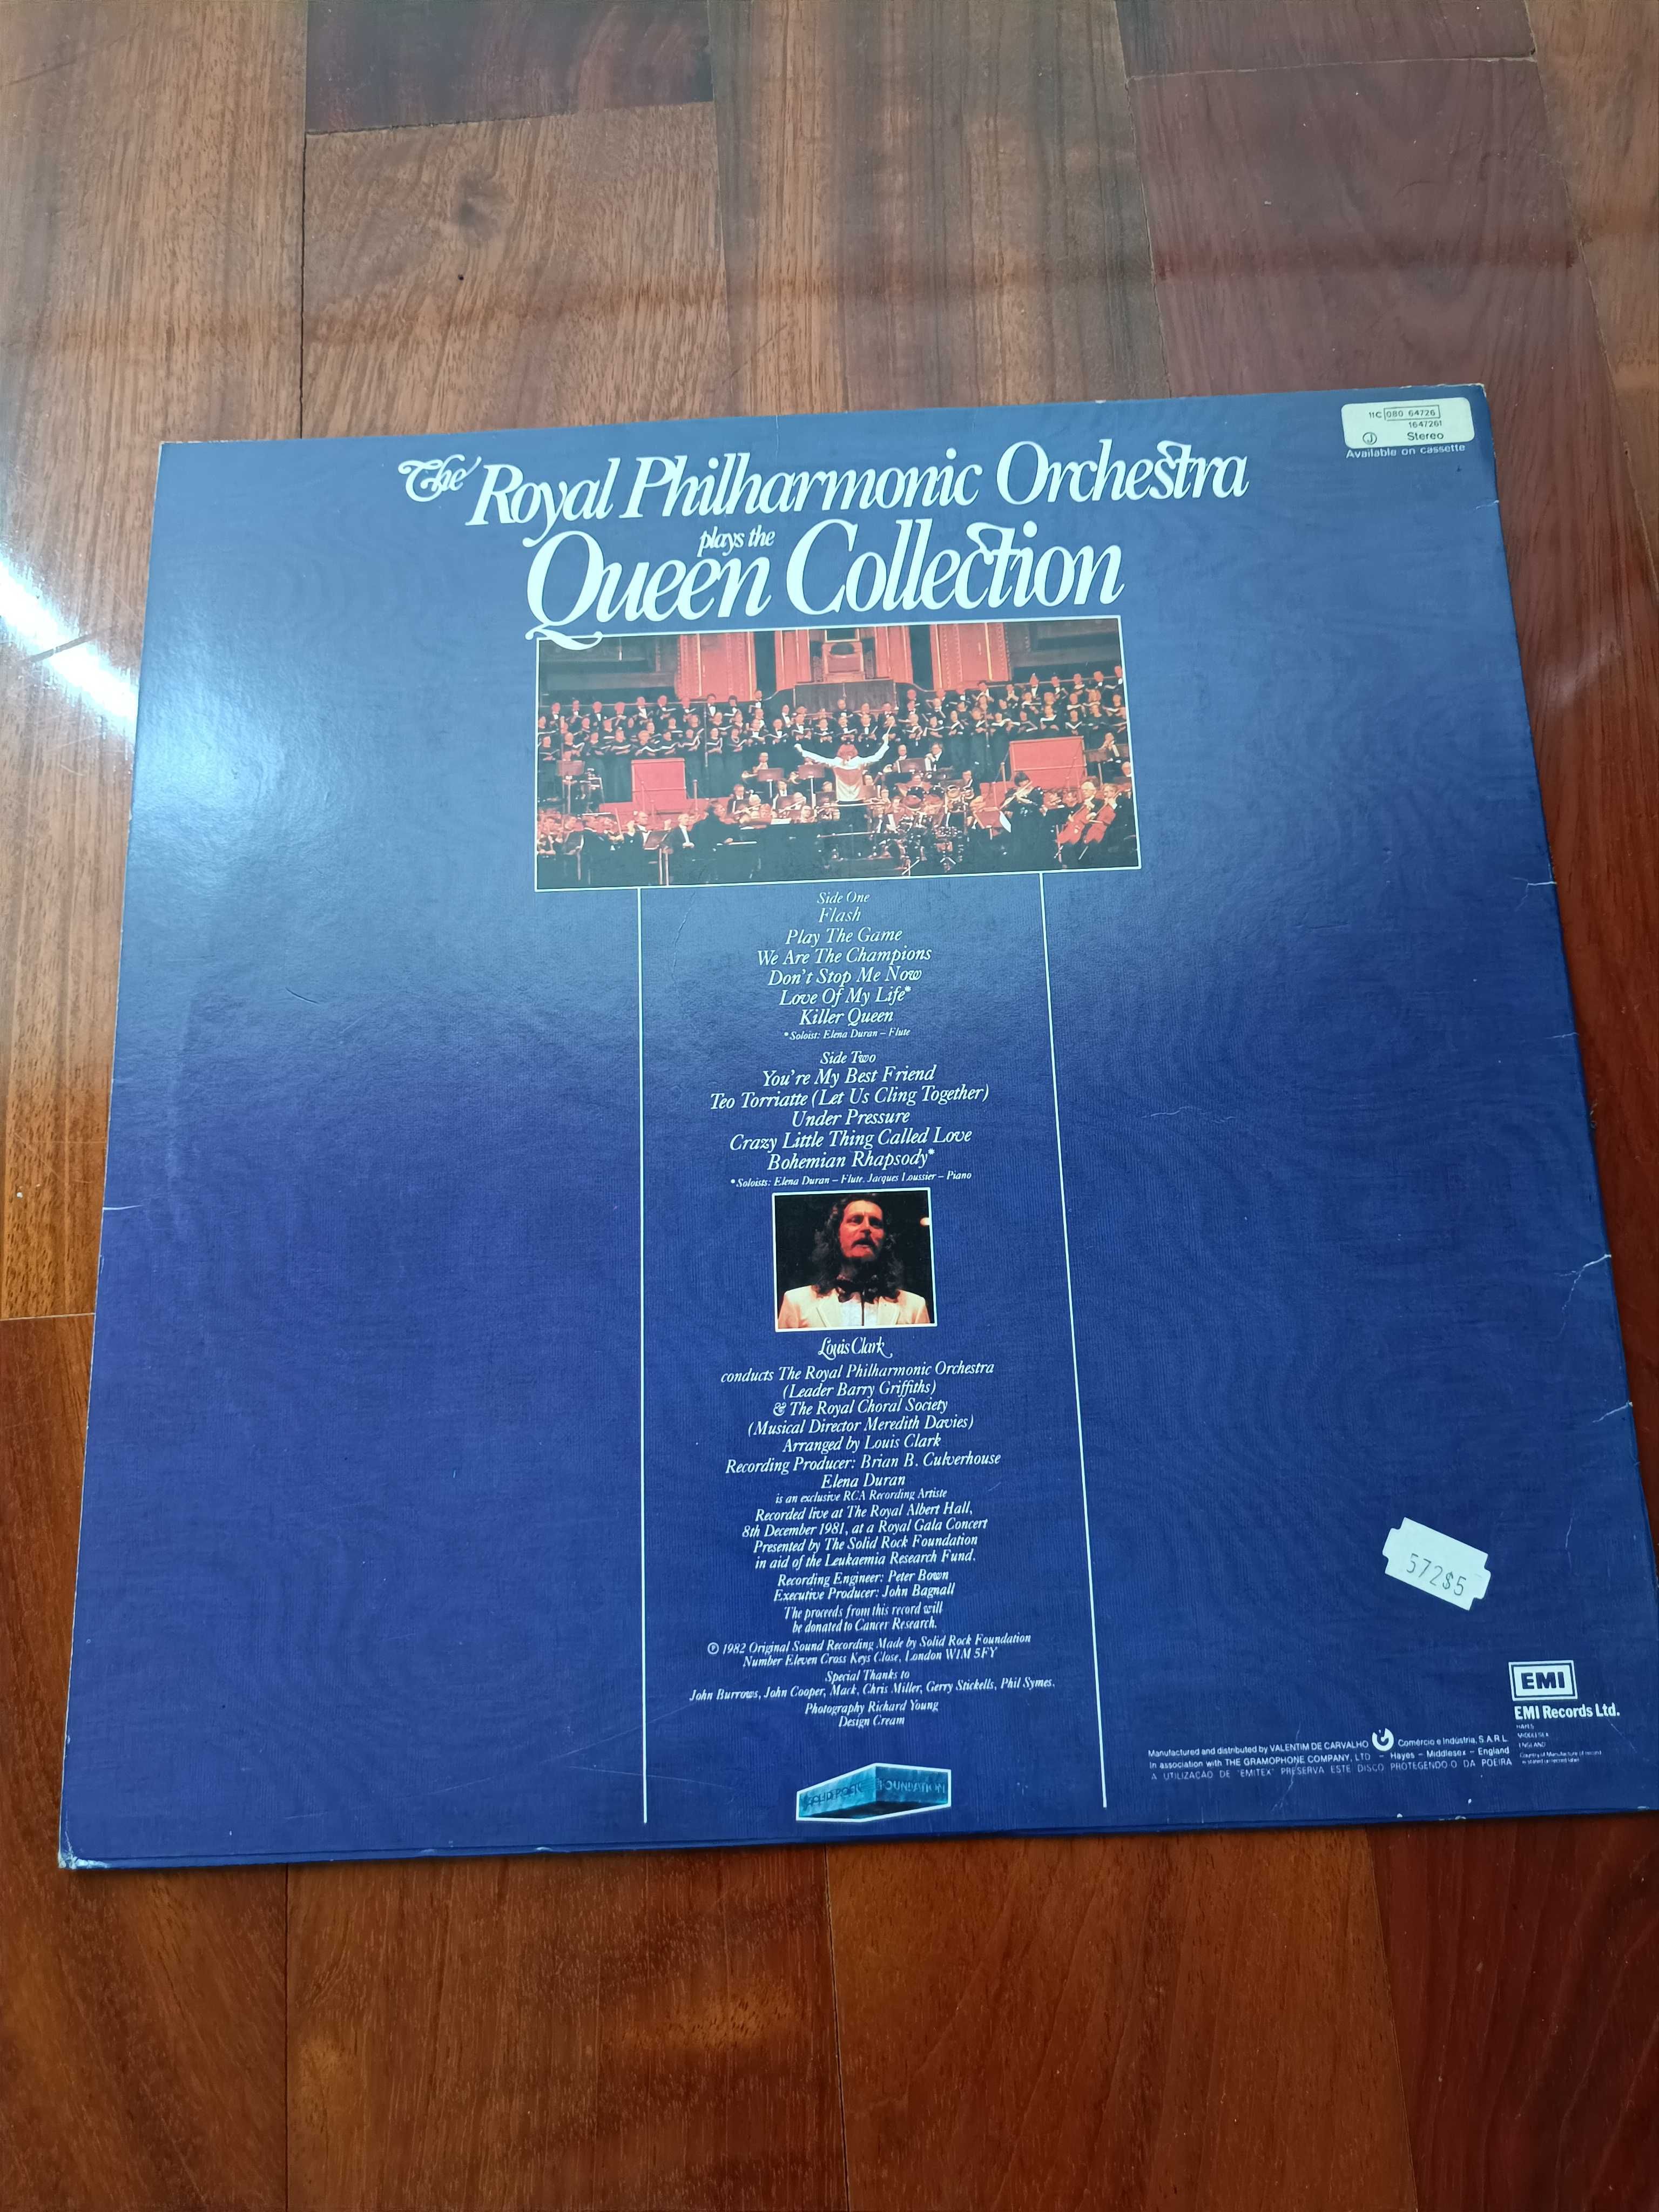 Disco Vinil "The Royal Philharmonic Orchestra - The Queen Collection"